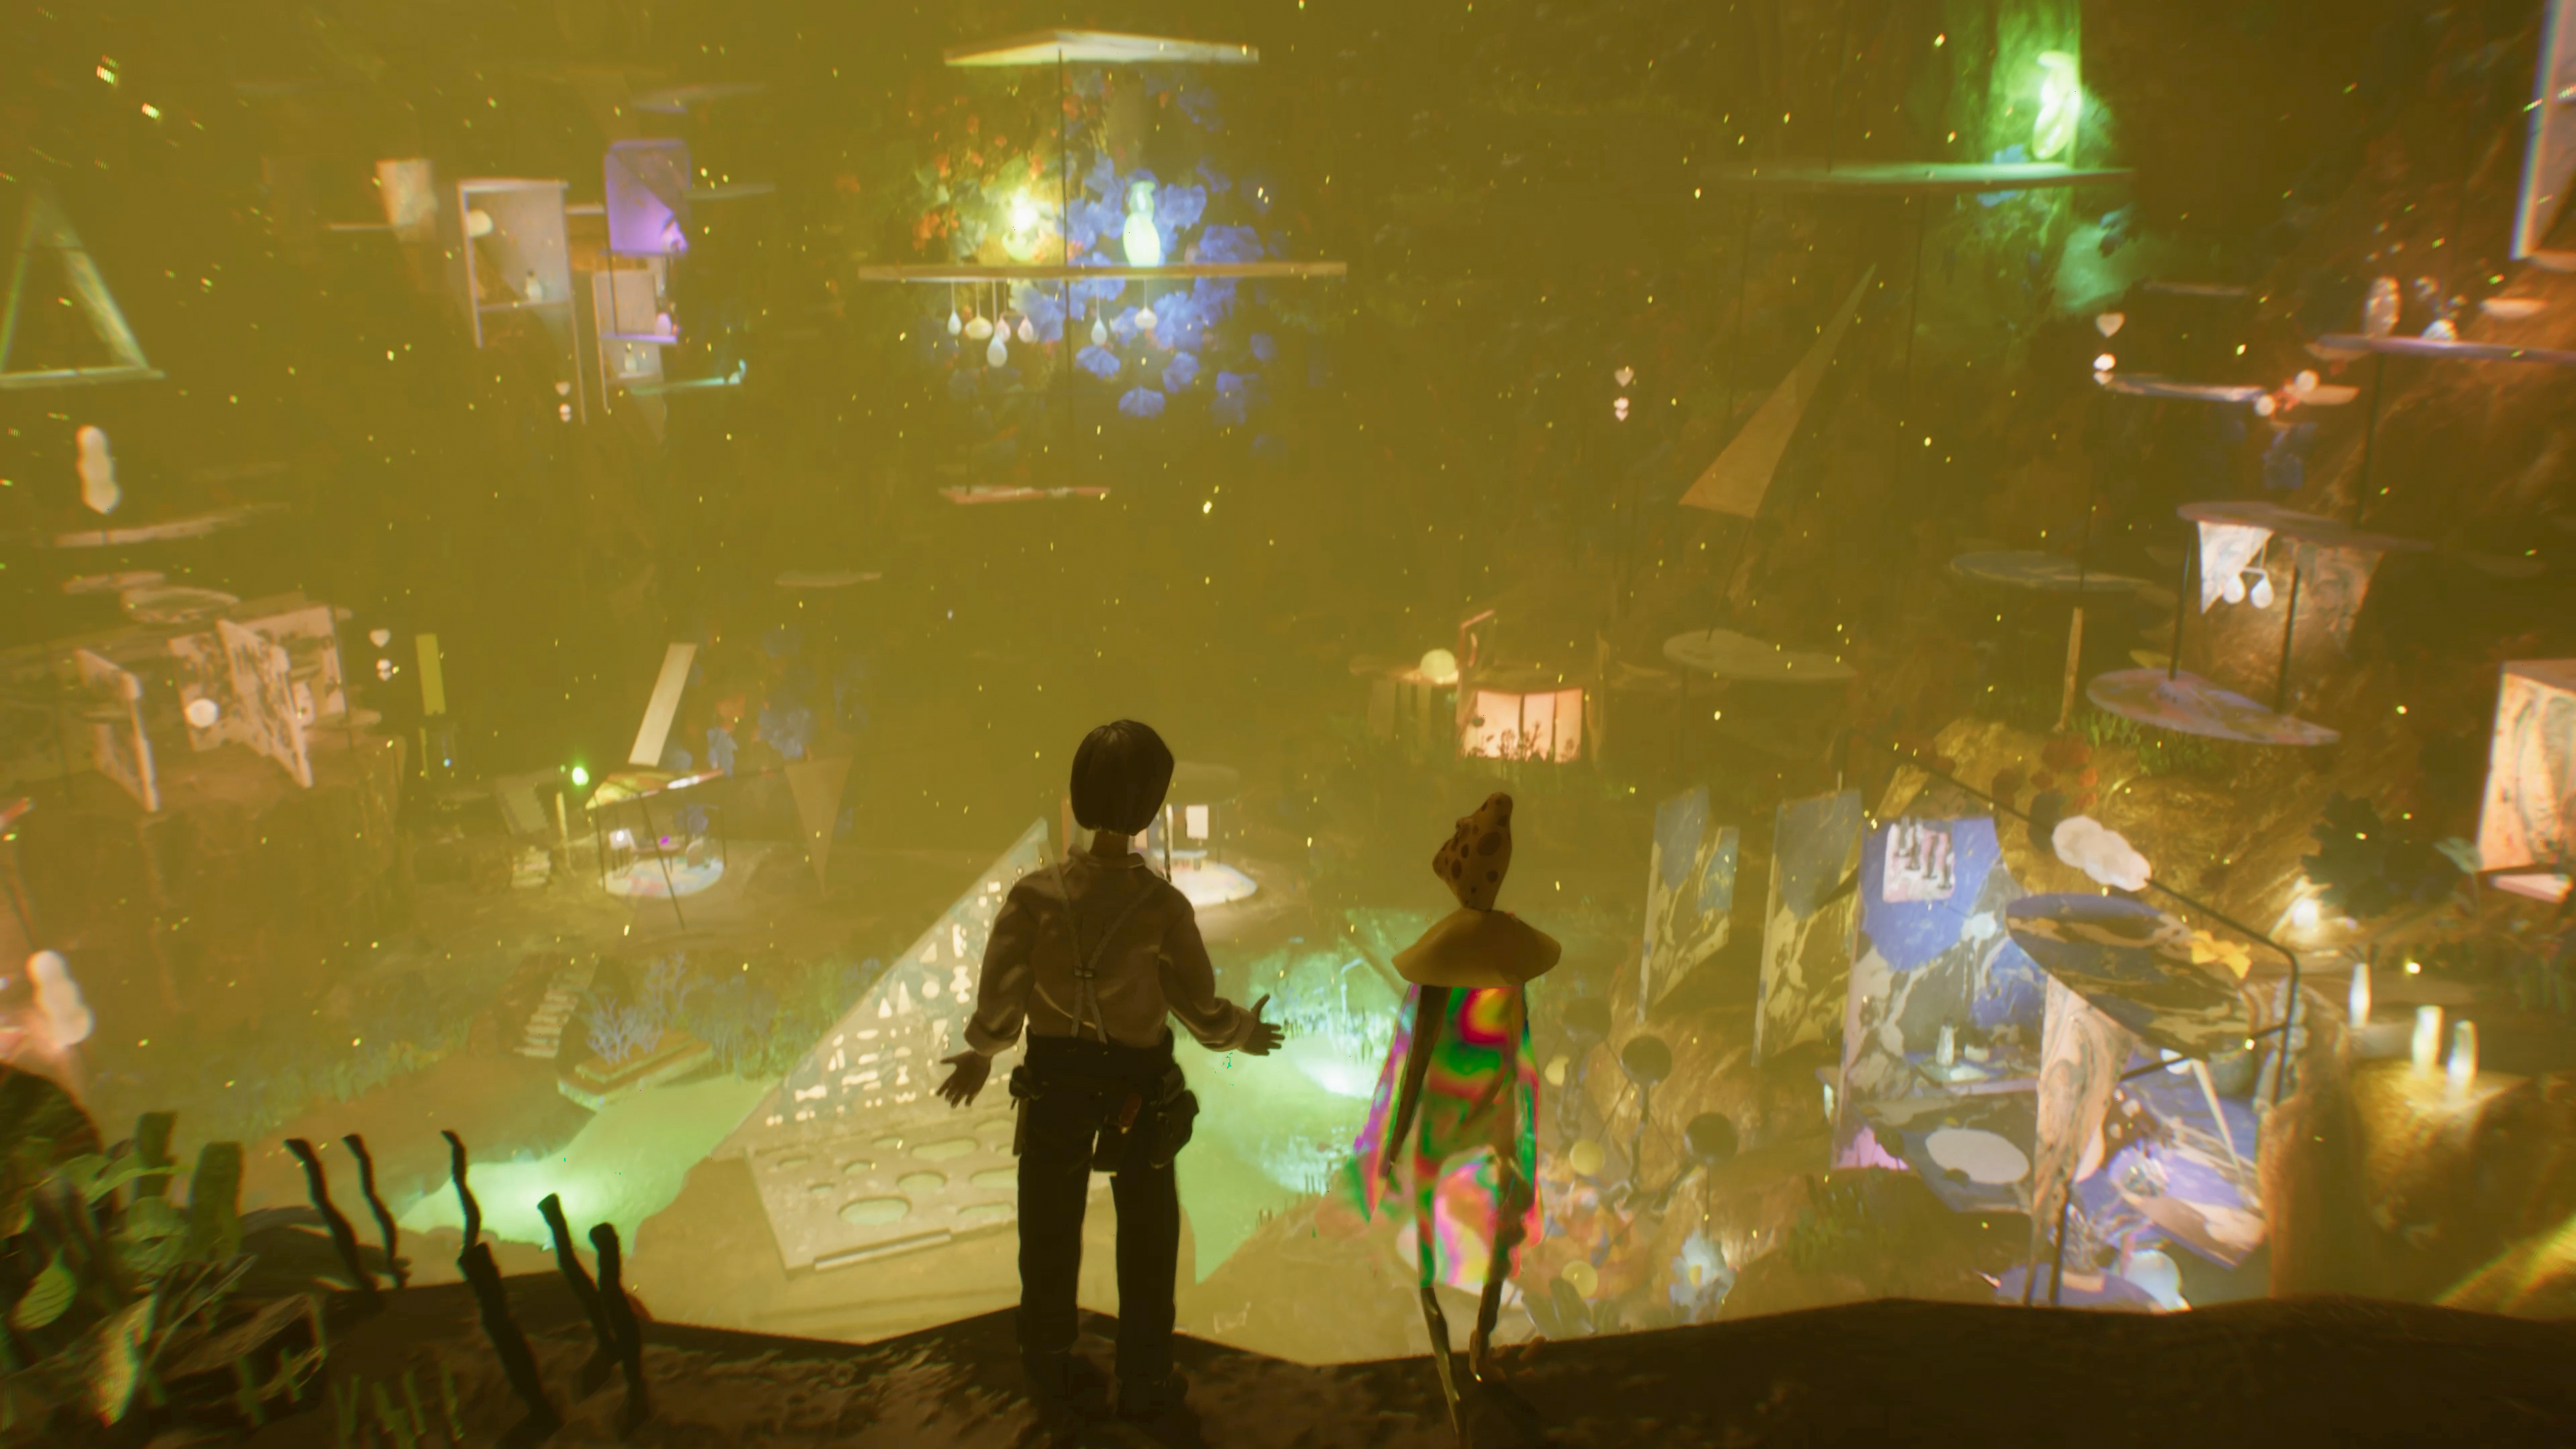 A man and a character with a mushroom cap for a head stand at the edge of a cliff, looking down at a vibrant, cluttered cavern filled with eclectic objects, artwork, and glowing lightsThe atmosphere is dreamlike, with a warm, yellowish glow and floating particles, creating a sense of otherworldly exploration.